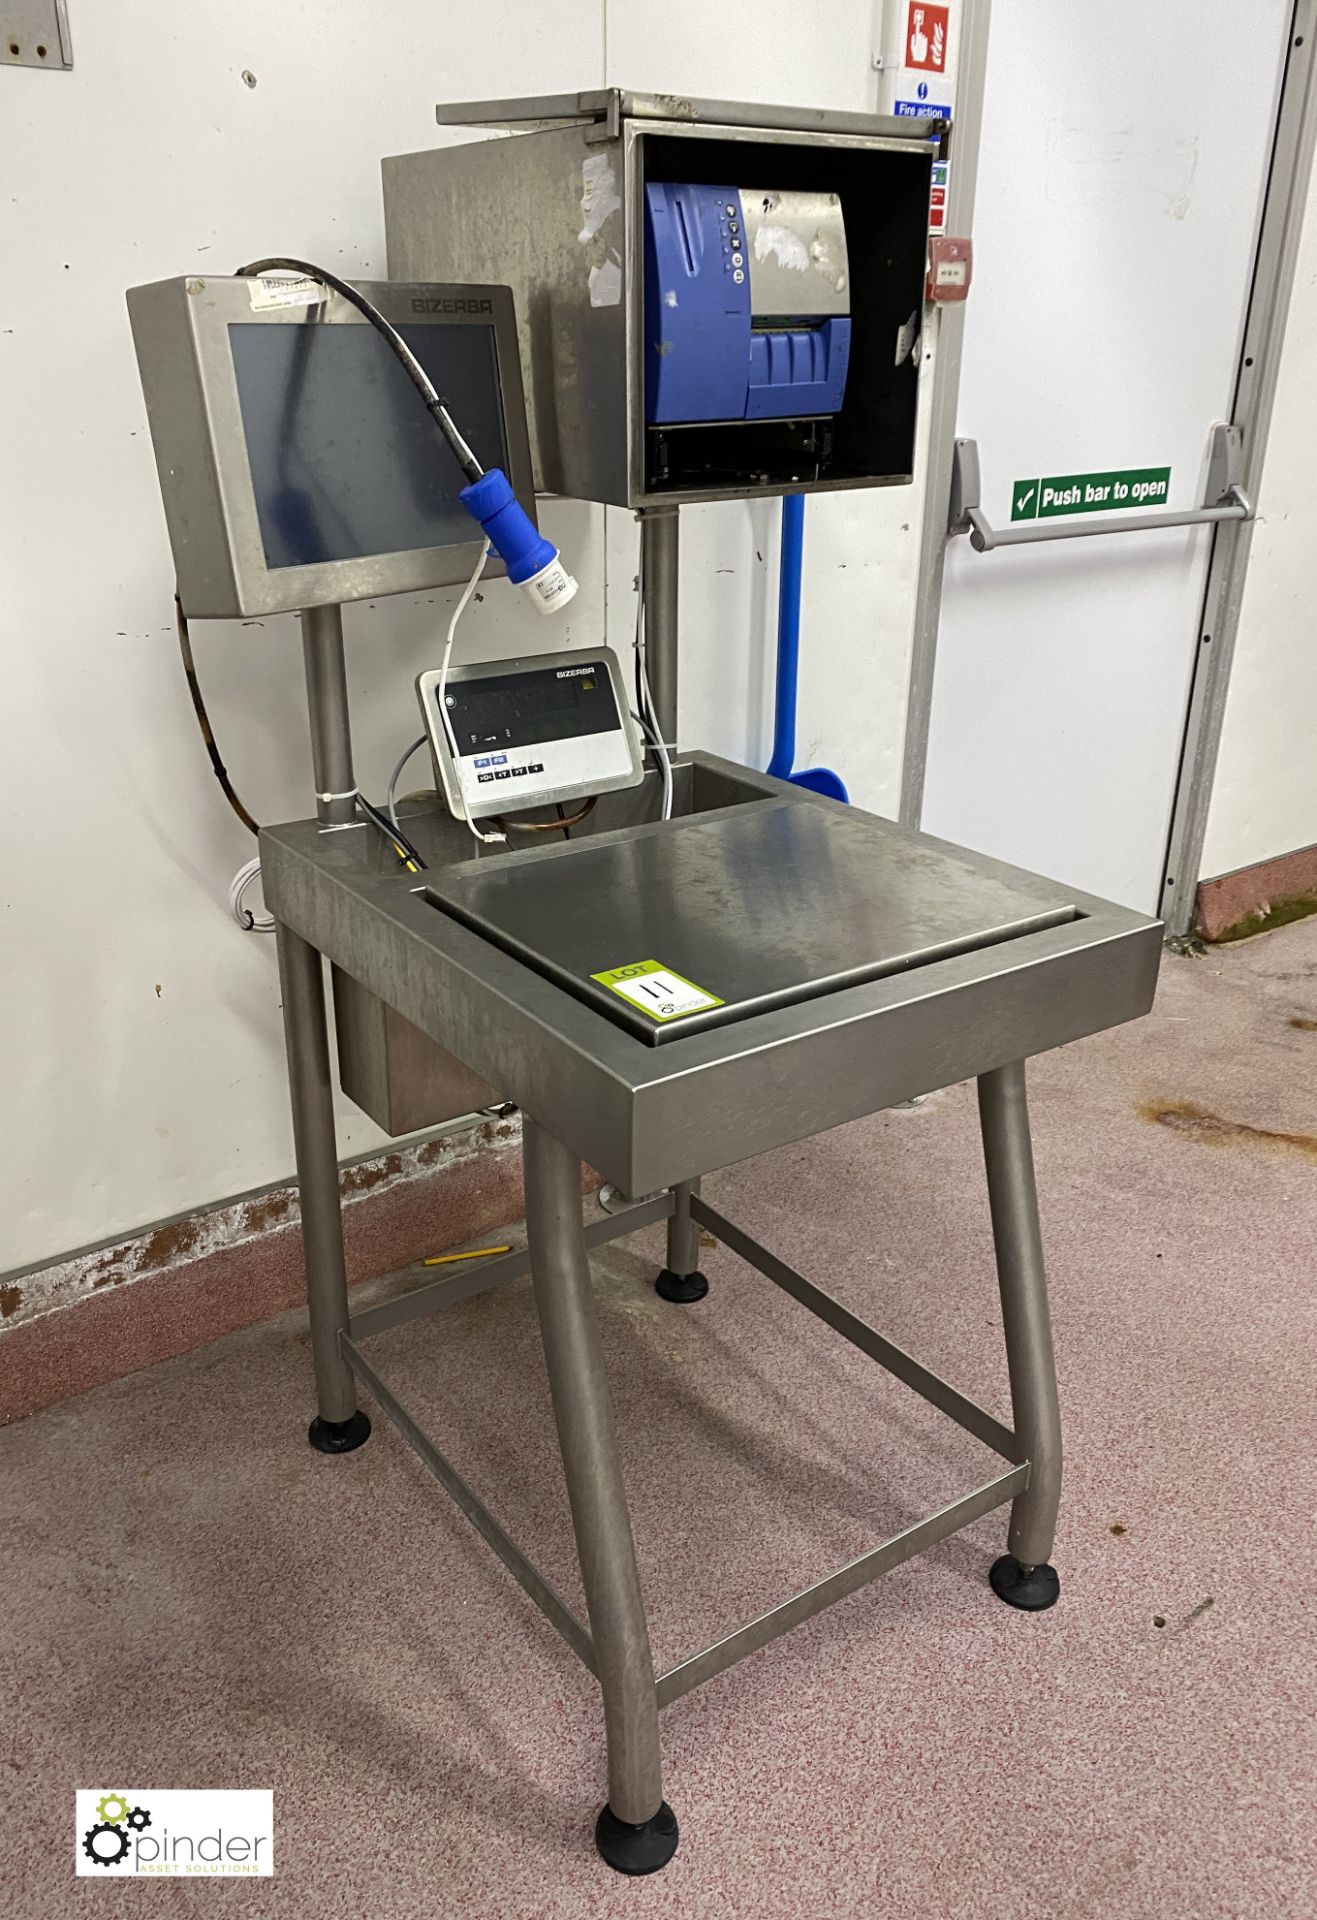 Bizerba Digital Weigh Station, with iS70 type 2.0 - Image 6 of 6